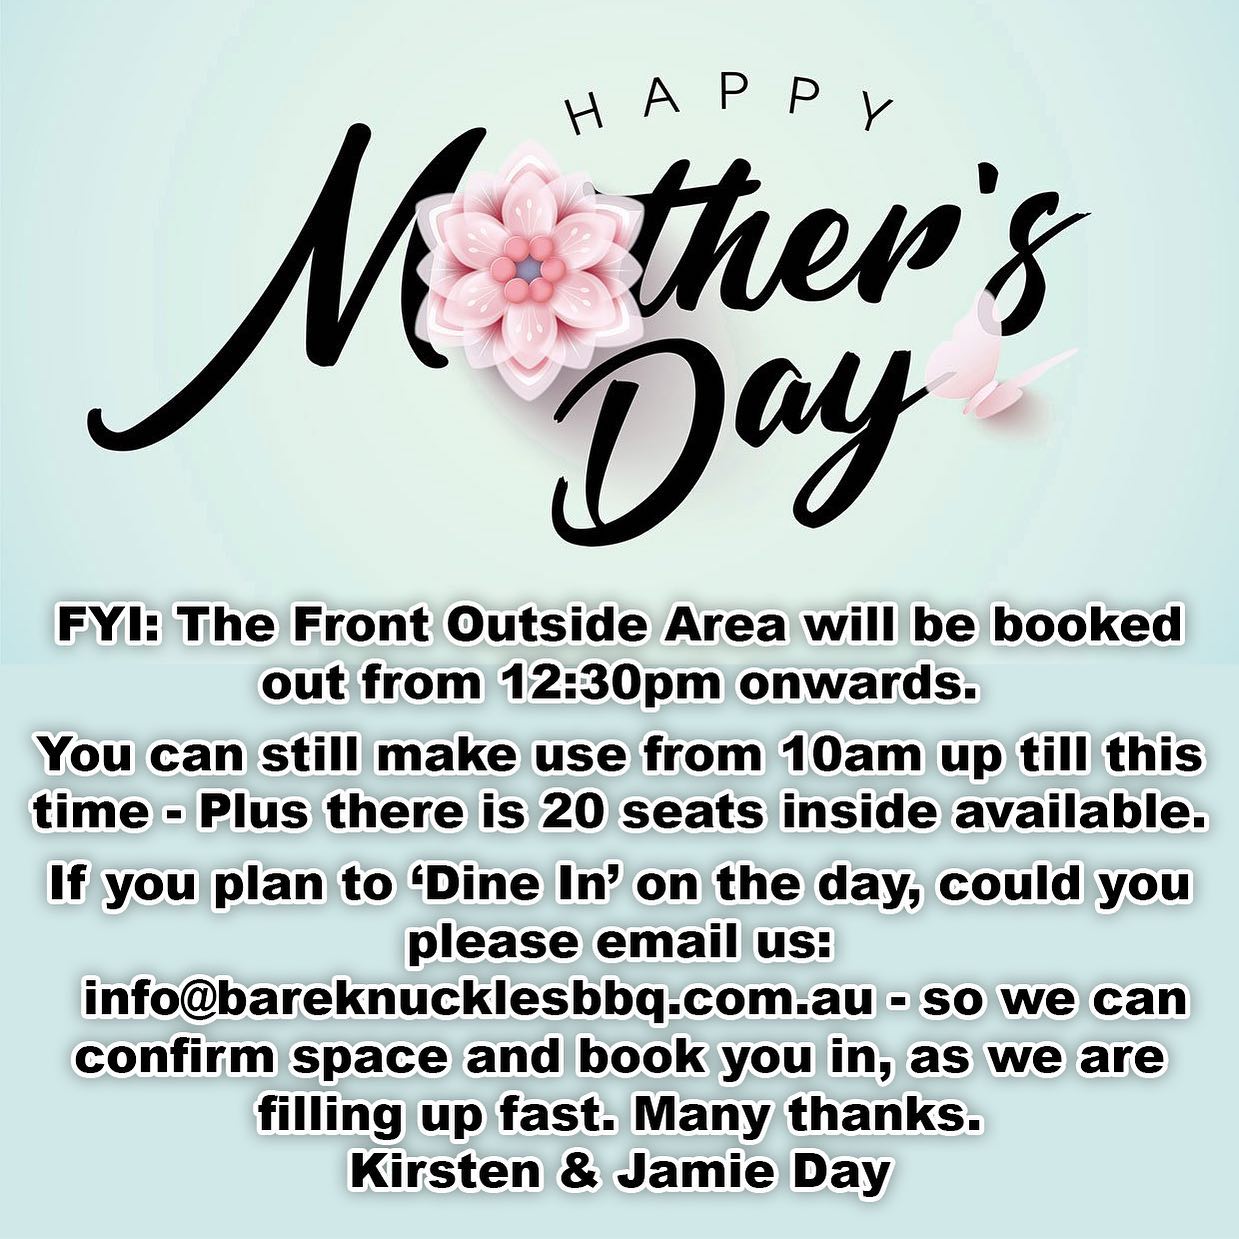 Mother’s Day - we are filling up fast ! - if you’d like to book a table - please send an email to info@bareknucklesbbq.com.au - thanks, Kirsten & Jamie 🏻